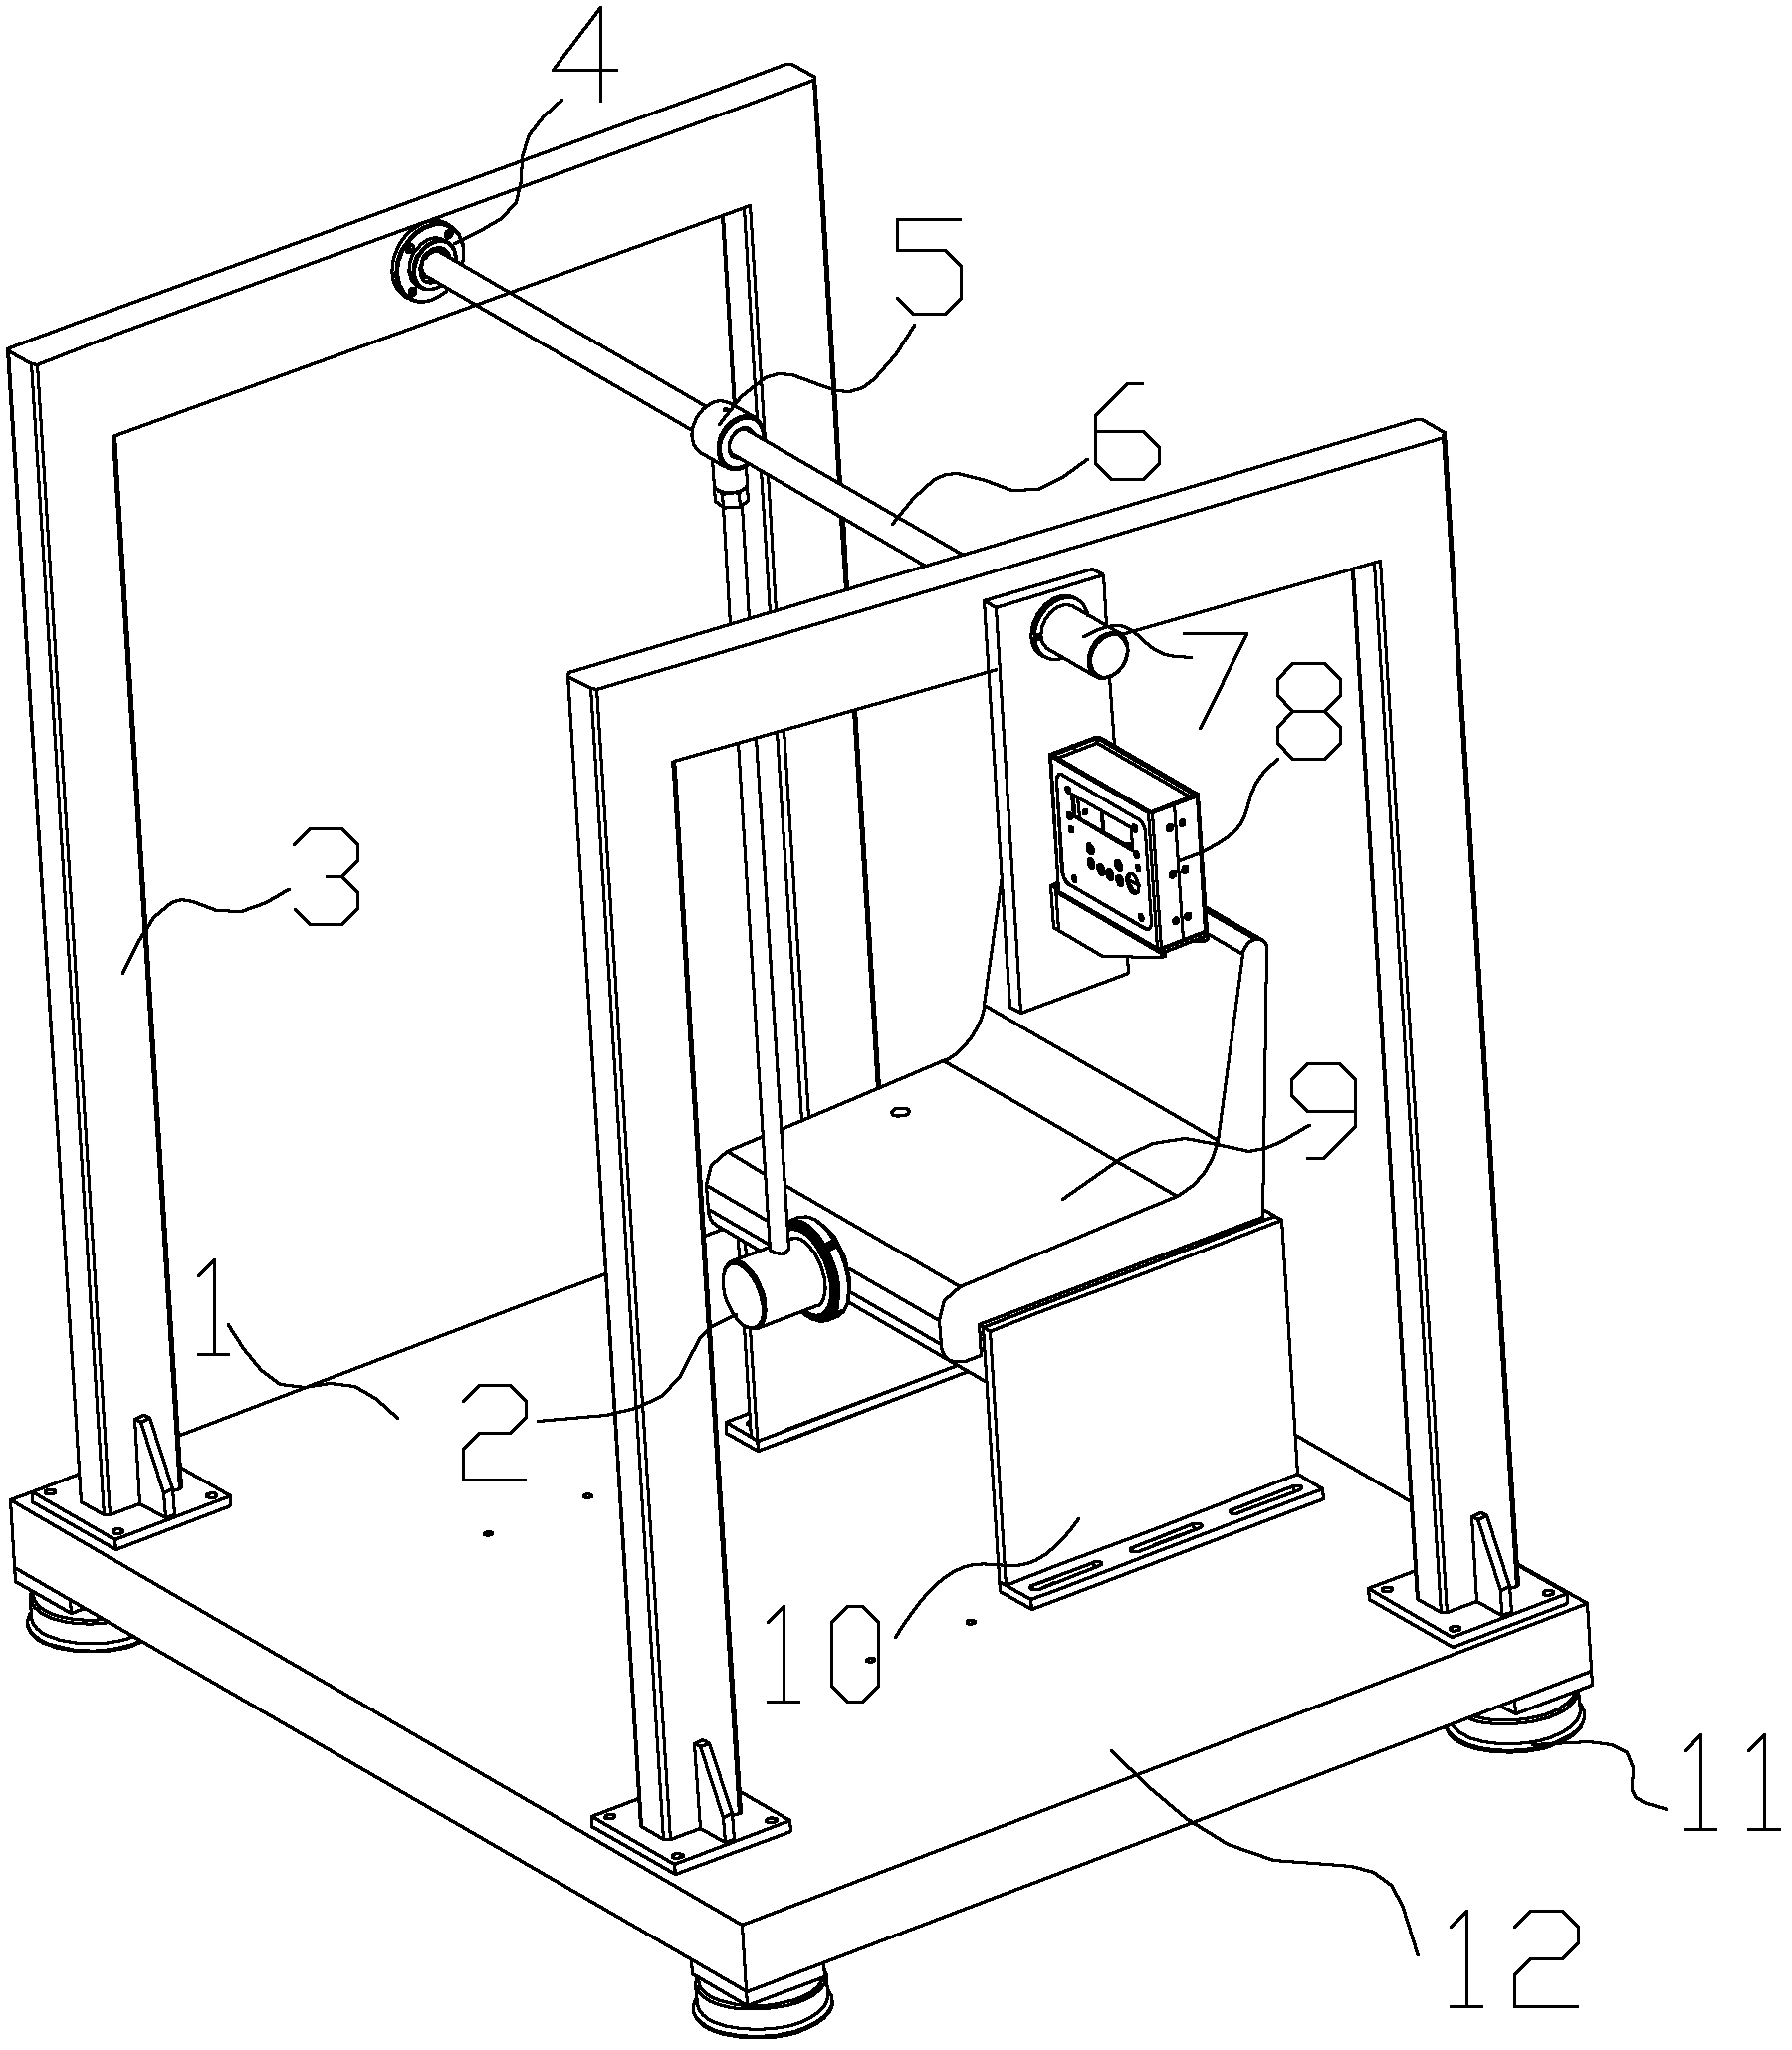 Test device and test method for horizontal impact of chair